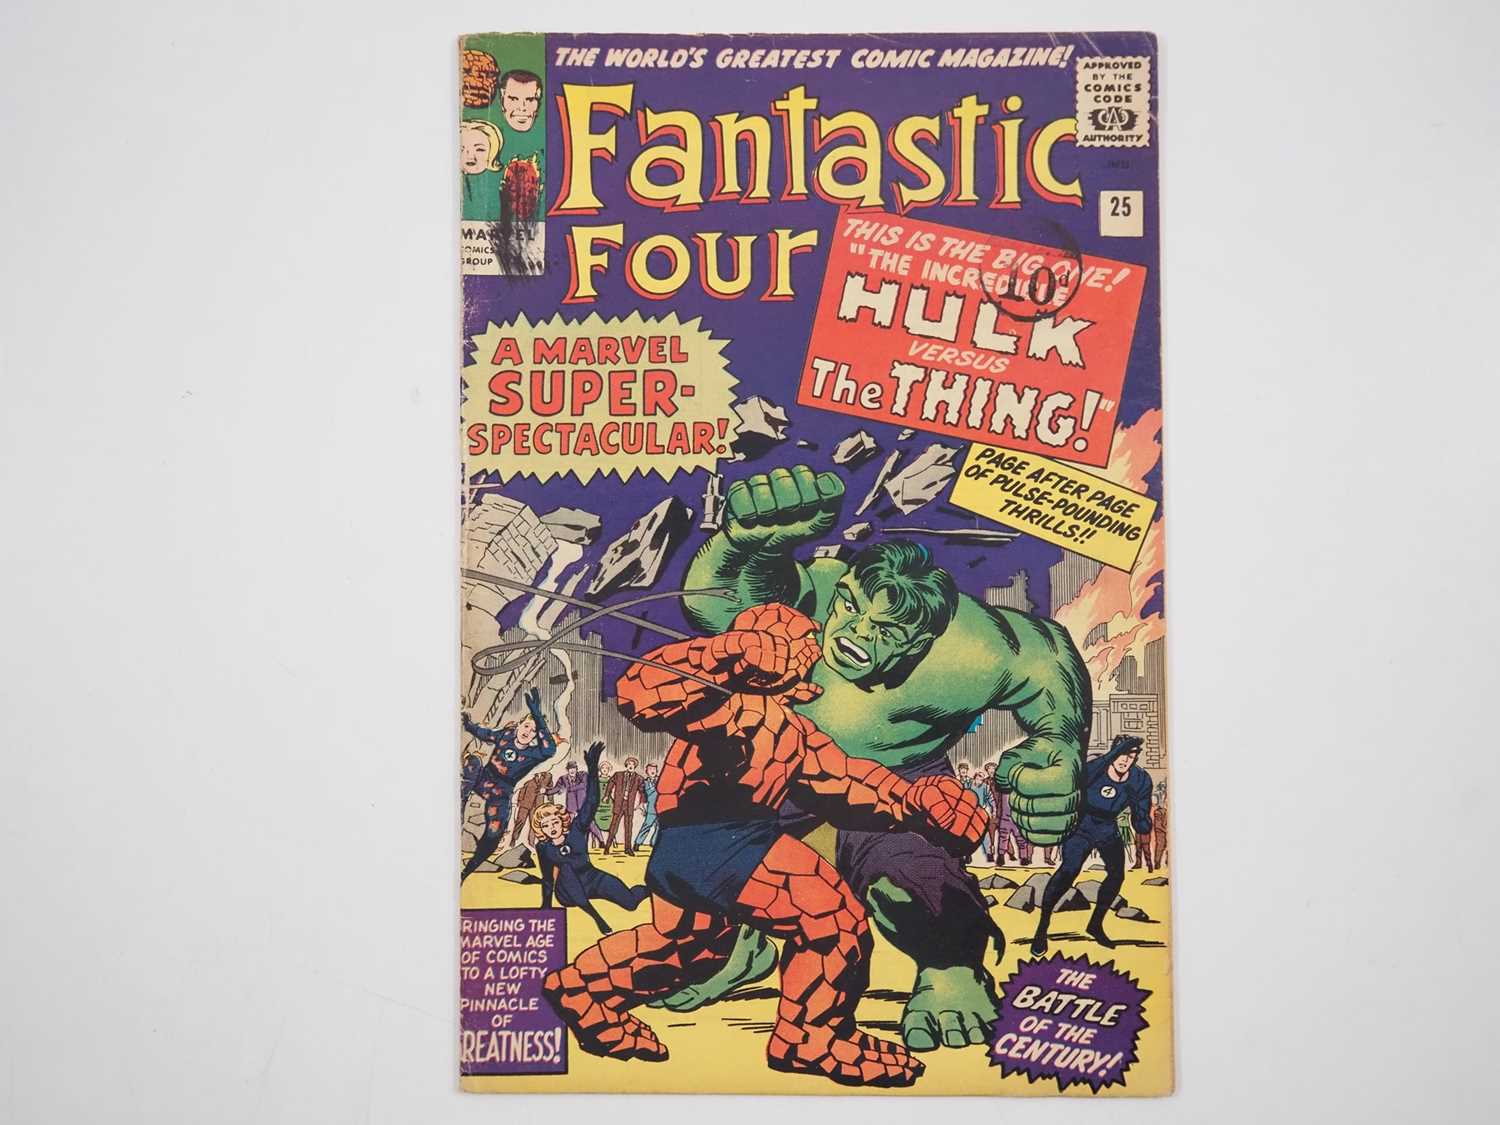 FANTASTIC FOUR #25 (1964 - MARVEL) - Includes the second appearance of Captain America in the Silver